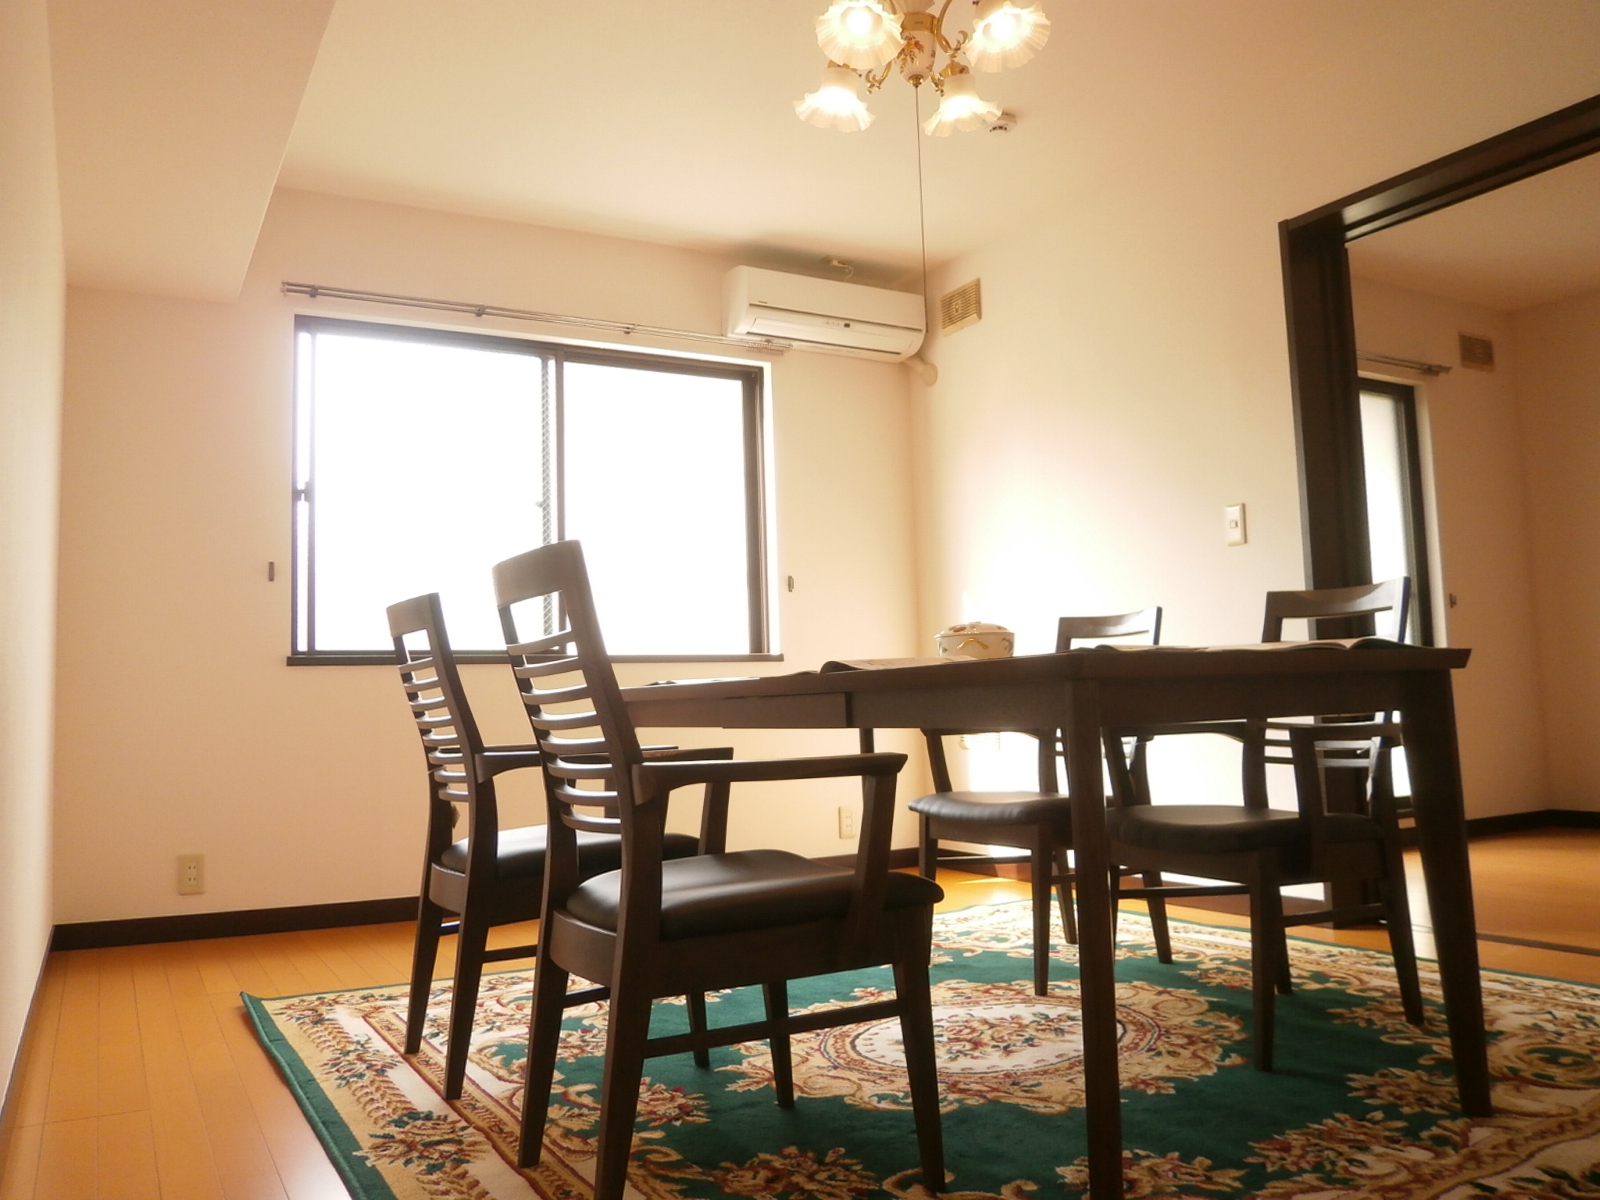 Living and room. Bright living room ・ Air conditioning new ☆ (Furniture is an image)